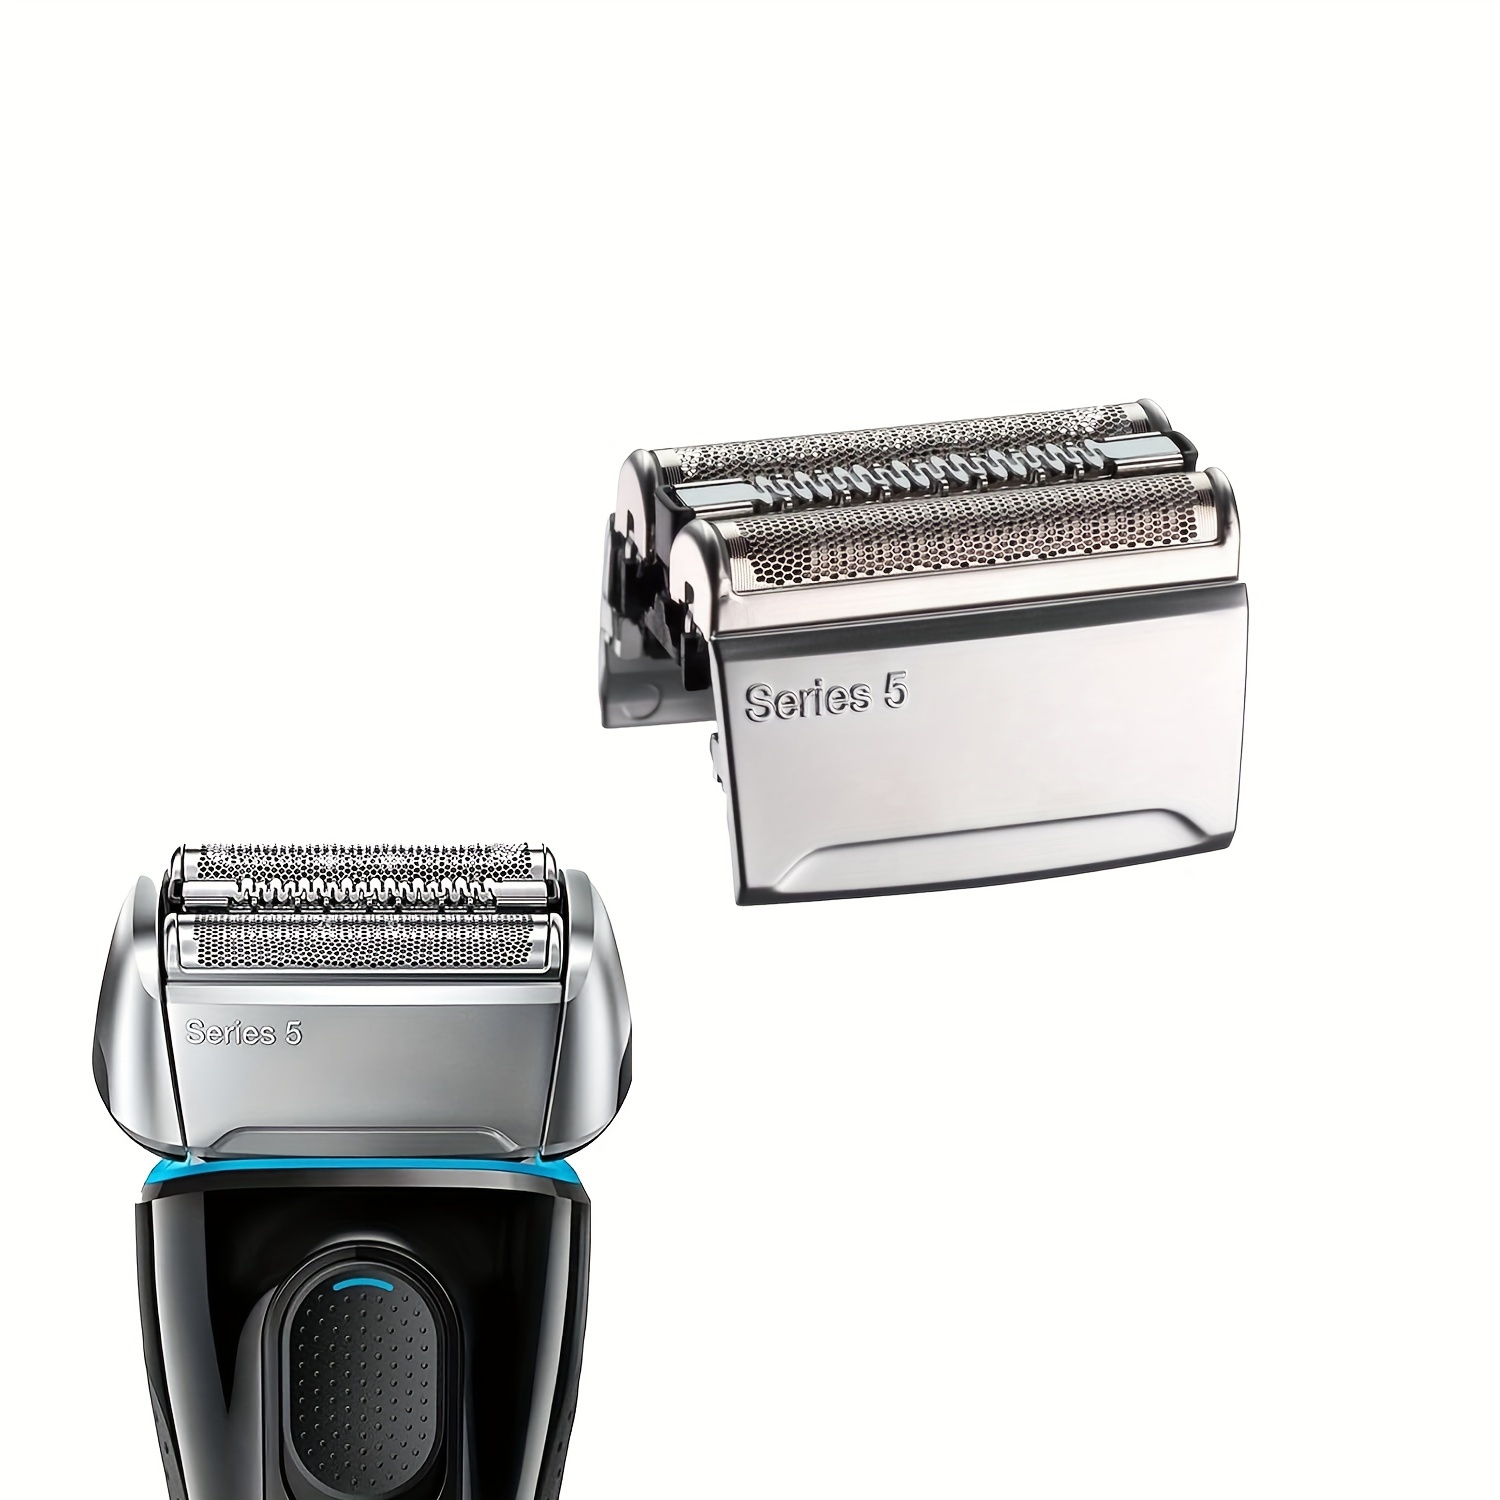 

Series 5 Electric Shaver Replacement Head - Hypoallergenic, Wet/dry Use, Compatible With Models 5190cc, 5090, 5020